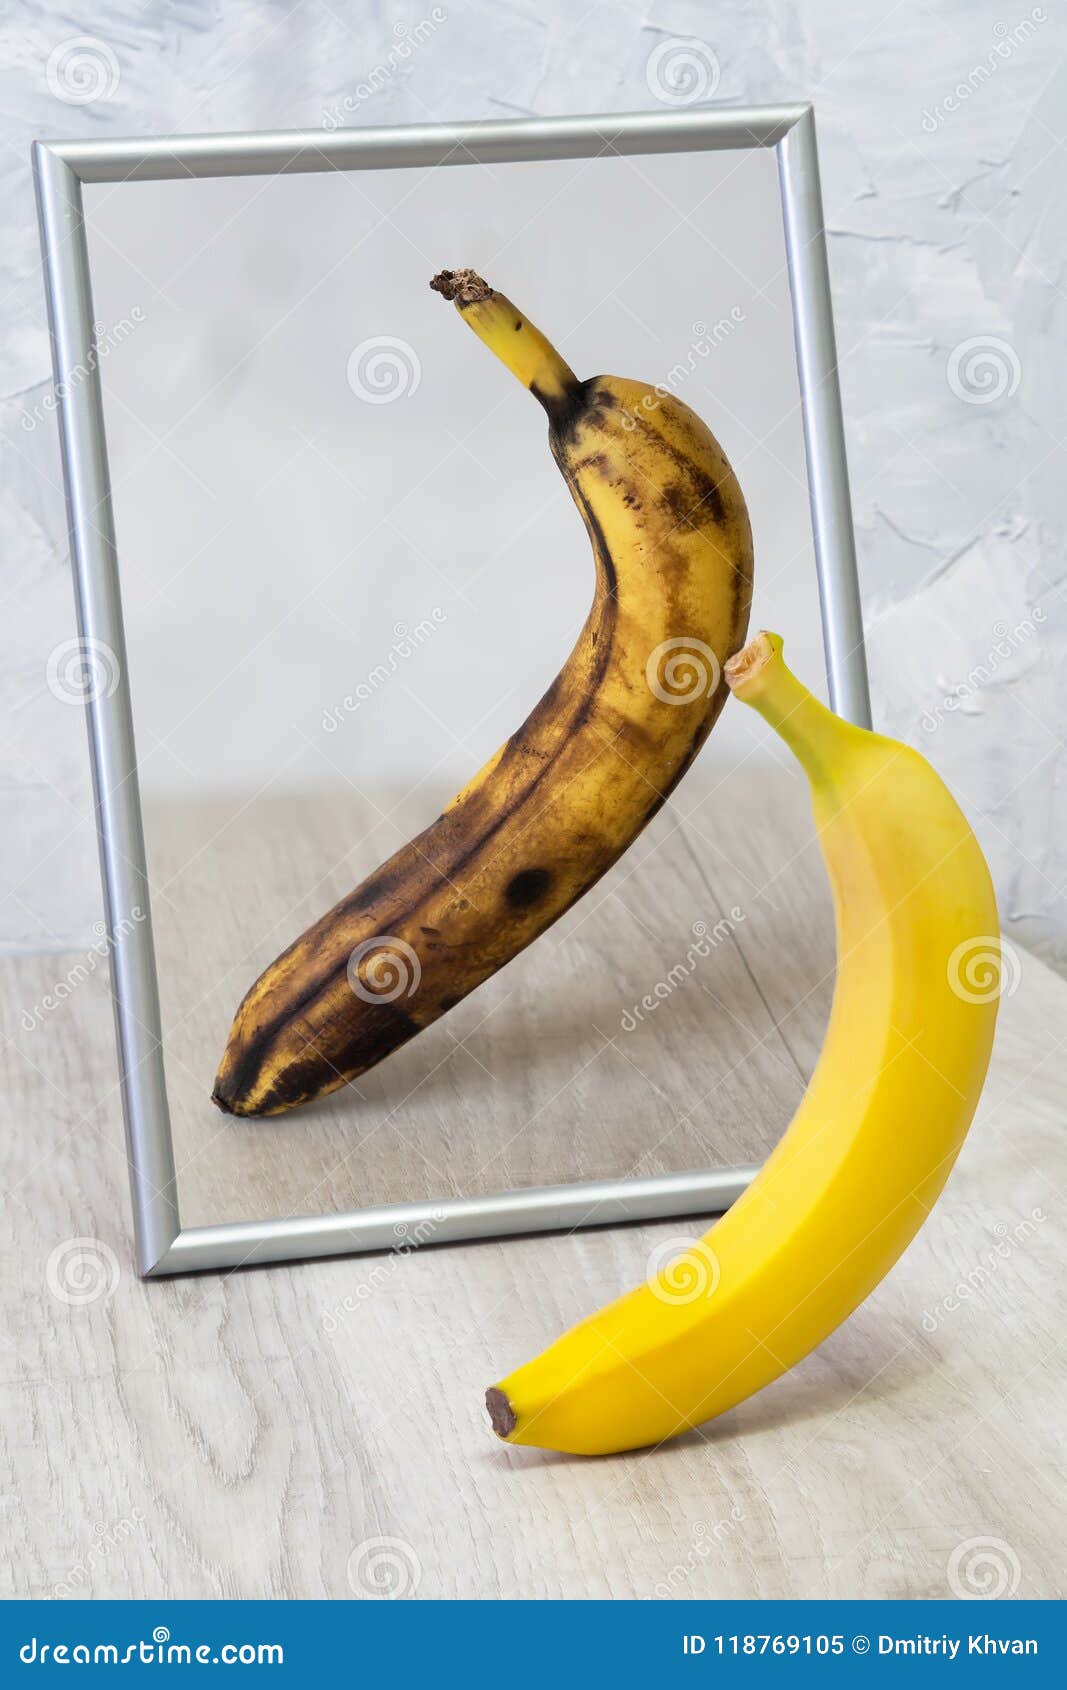 The Mirror Reflects A Spoiled Banana Stock Image Image Of Fatigue